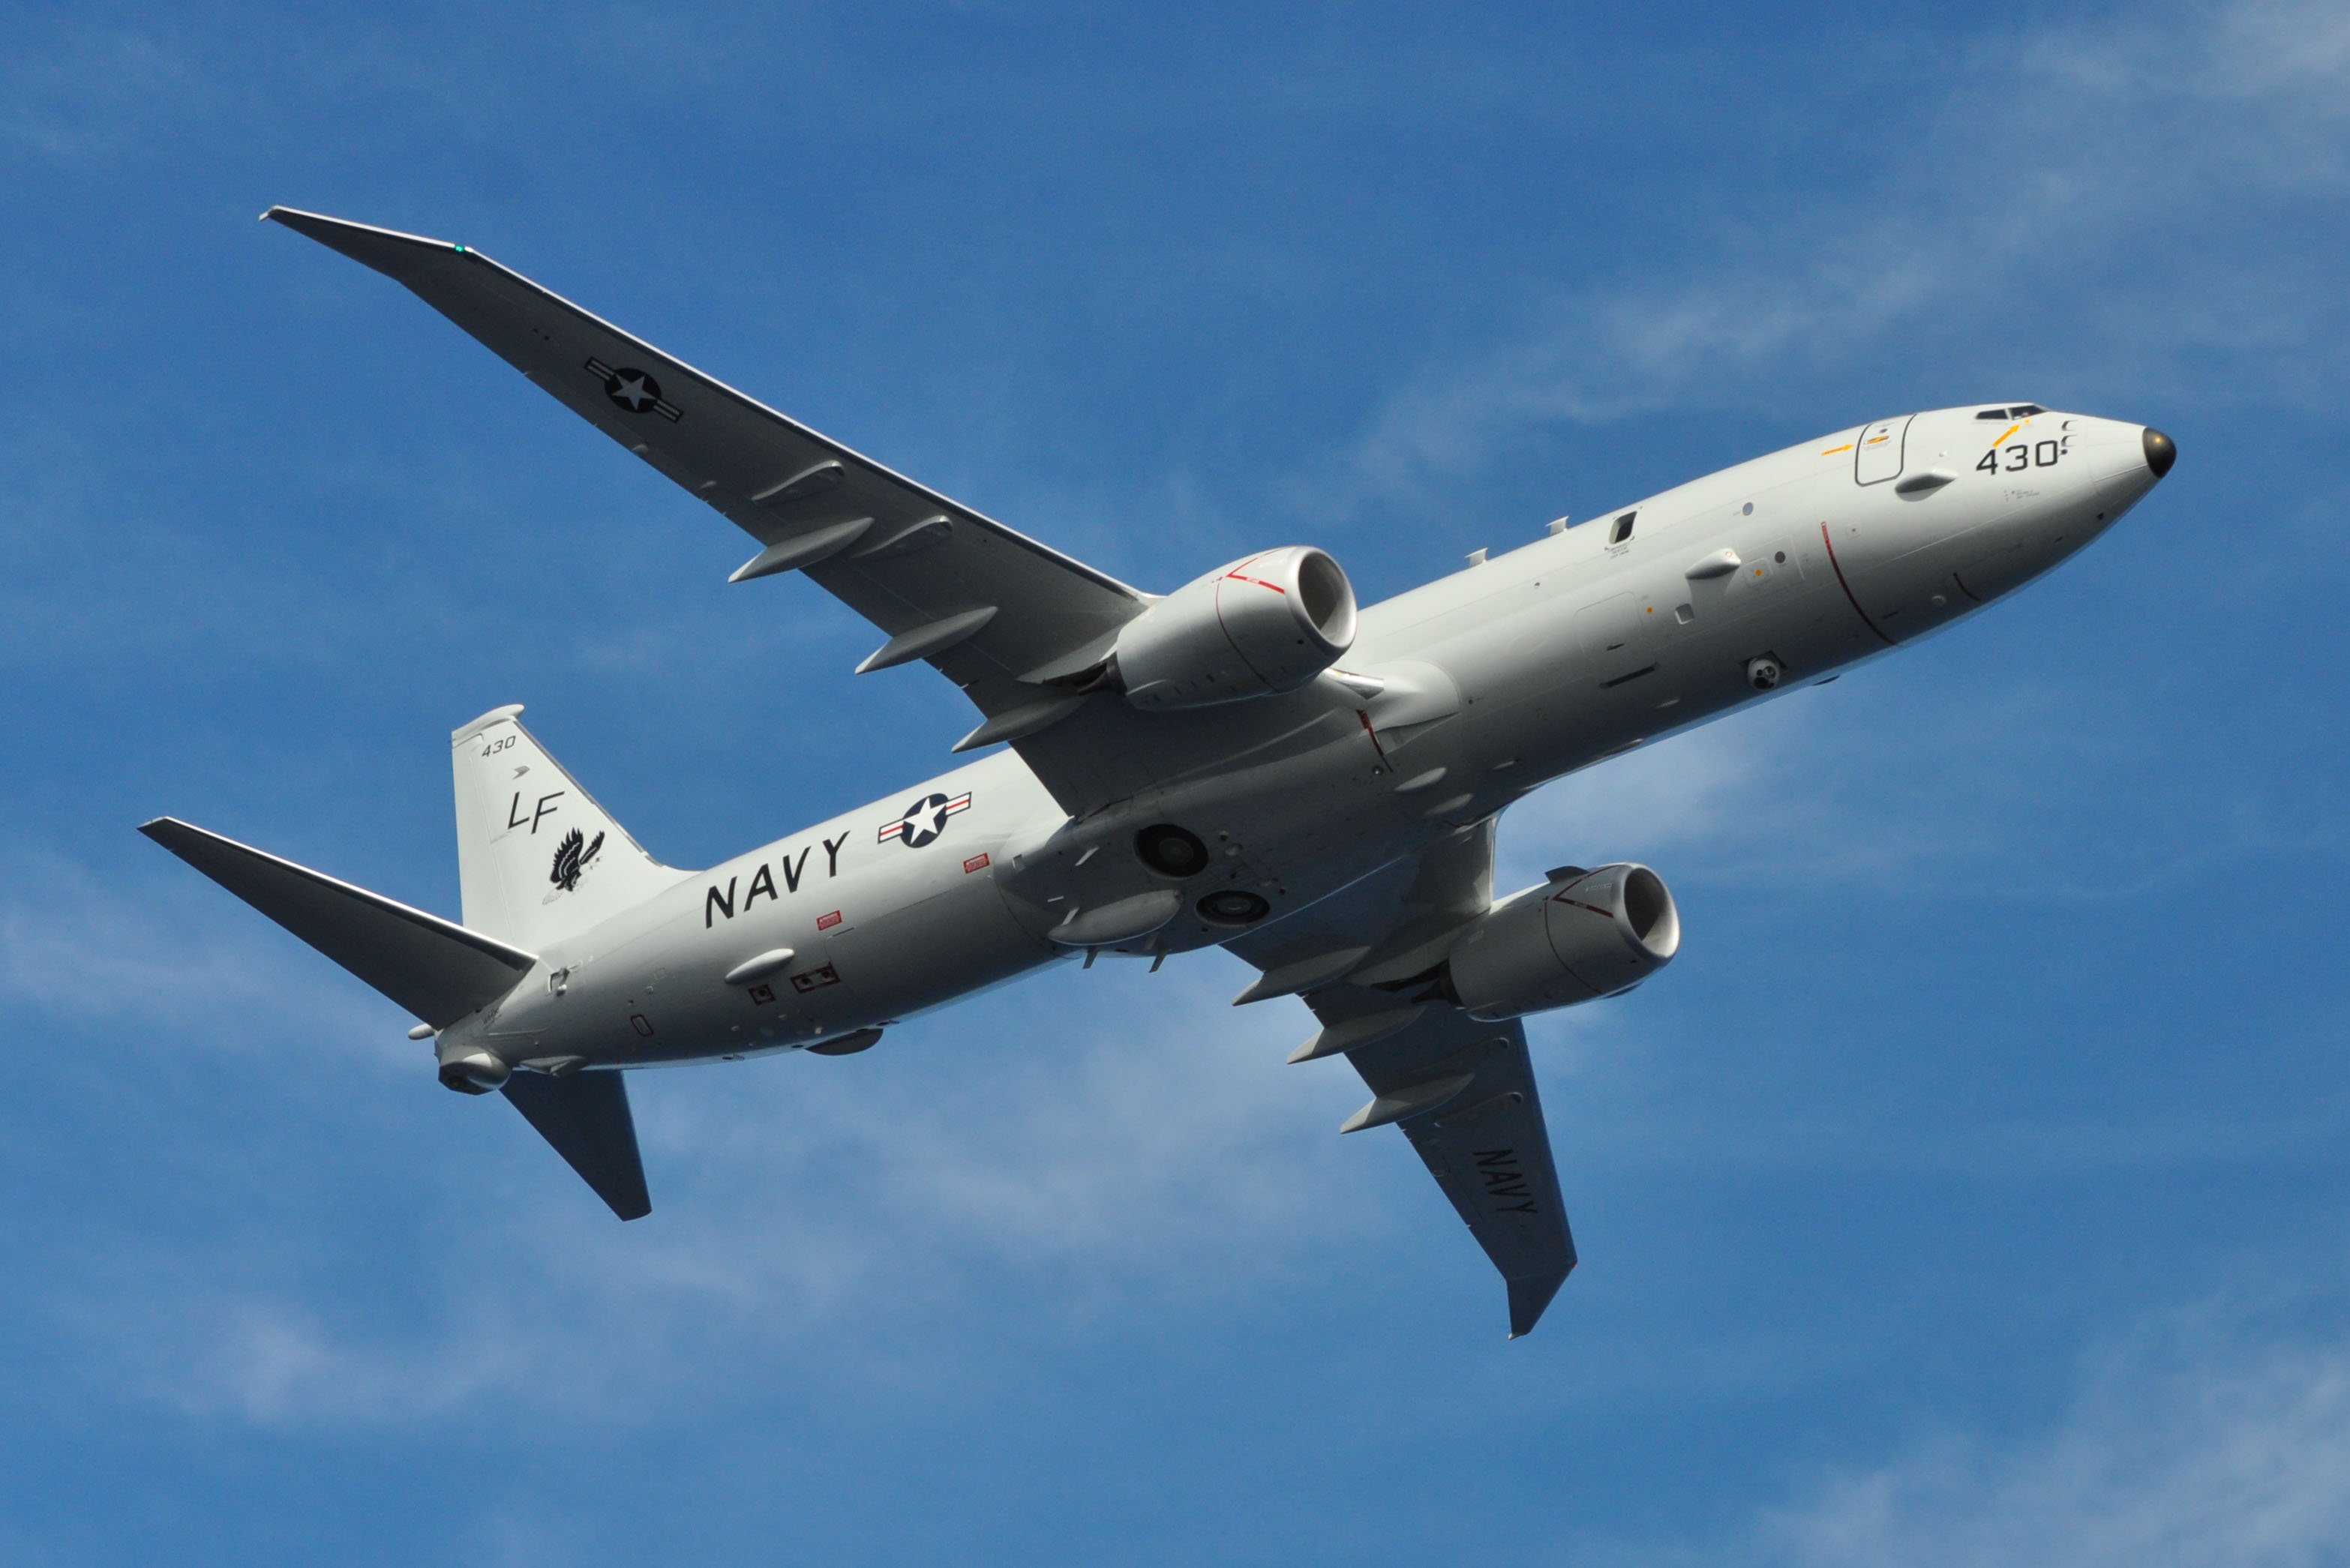 P-8A Poseidon, operated by Patrol Squadron (VP-16) in February, 2013. US Navy Photo